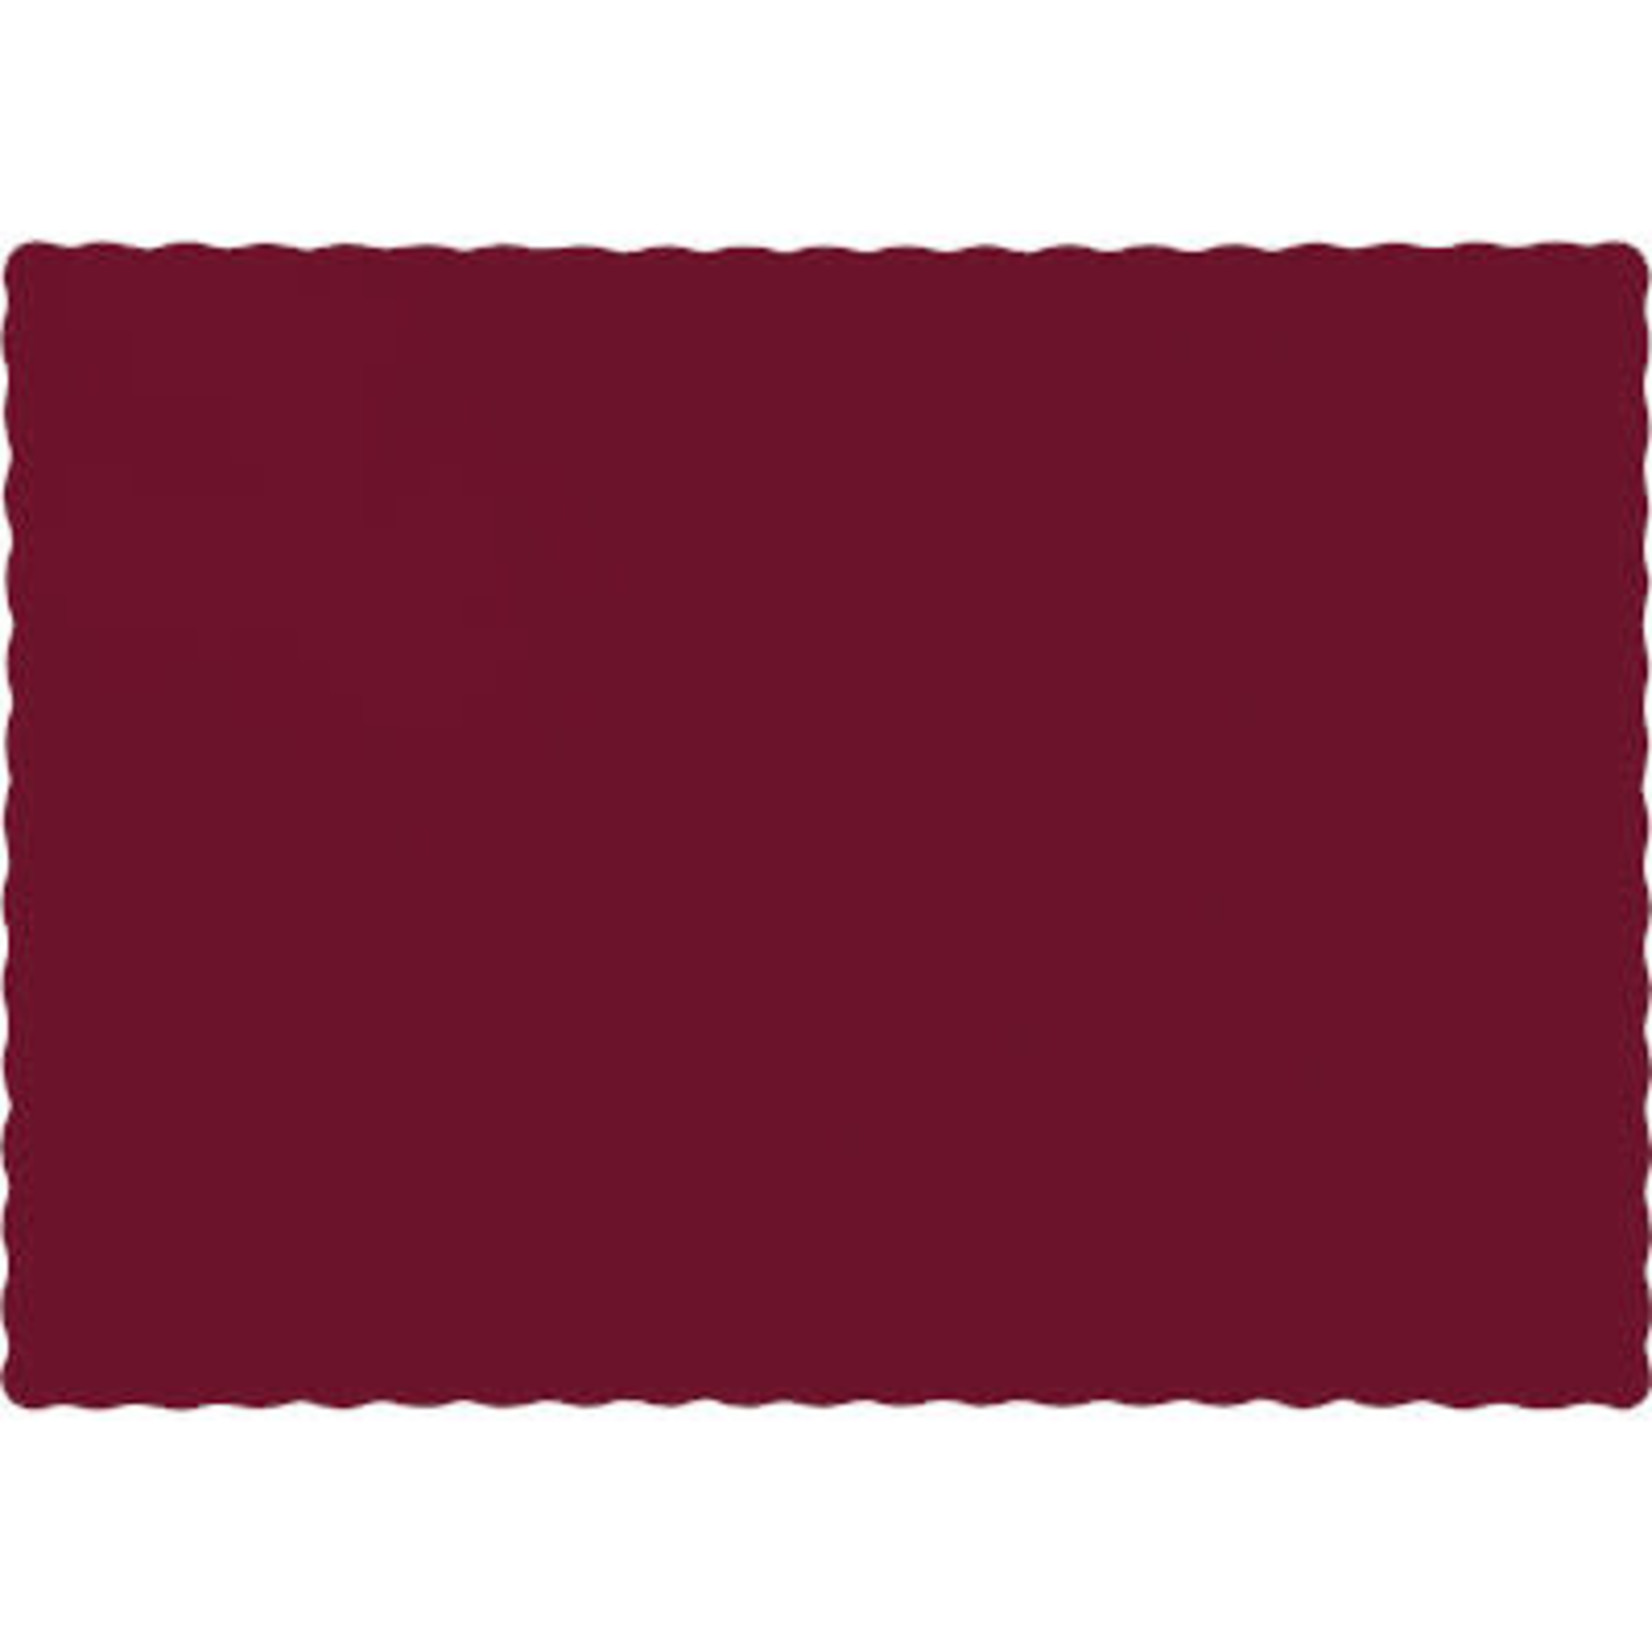 Touch of Color Burgundy Paper Placemats - 50ct.